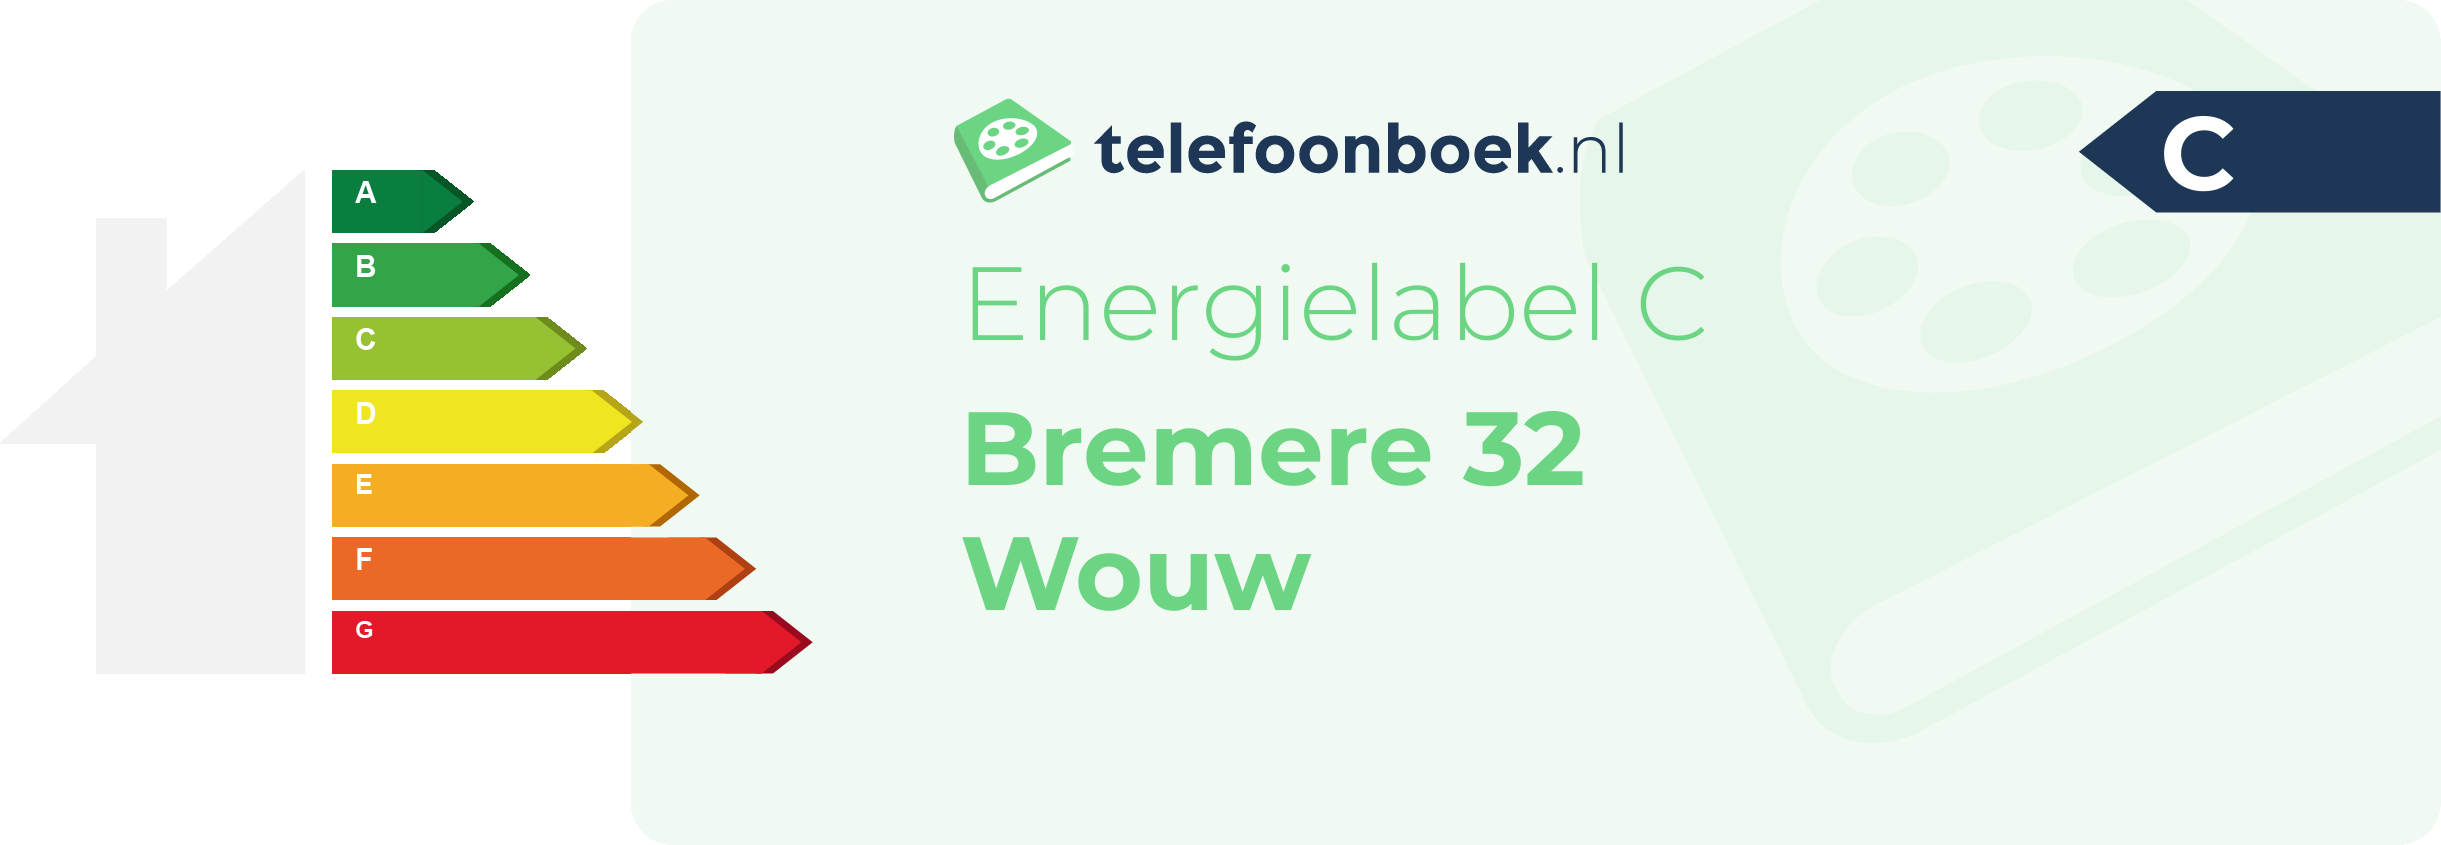 Energielabel Bremere 32 Wouw